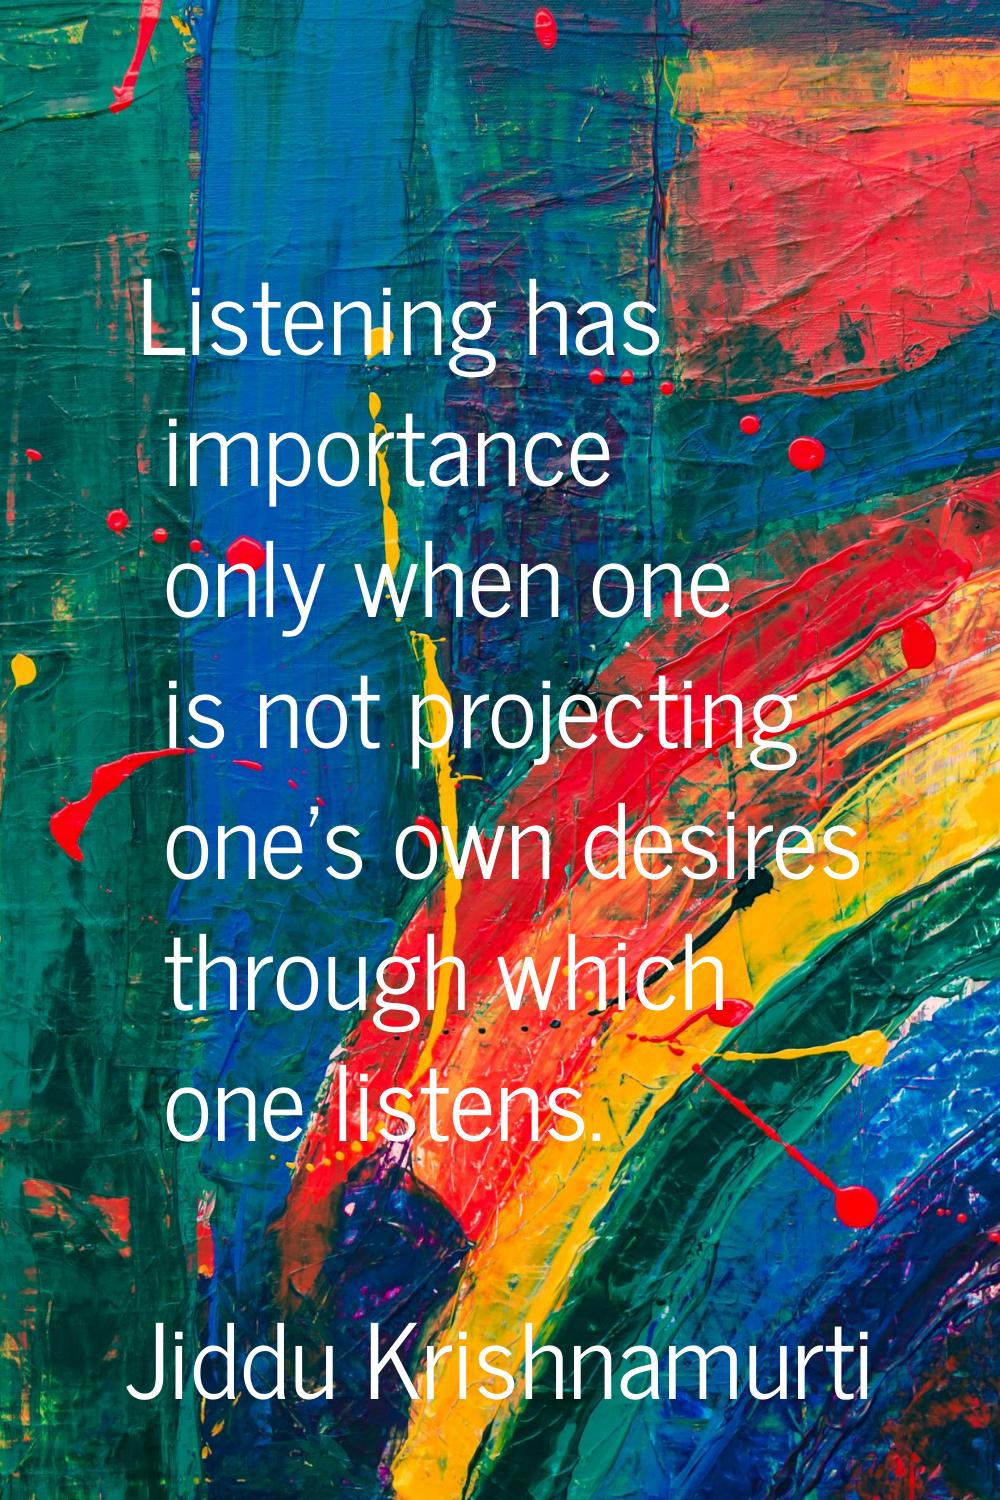 Listening has importance only when one is not projecting one's own desires through which one listen